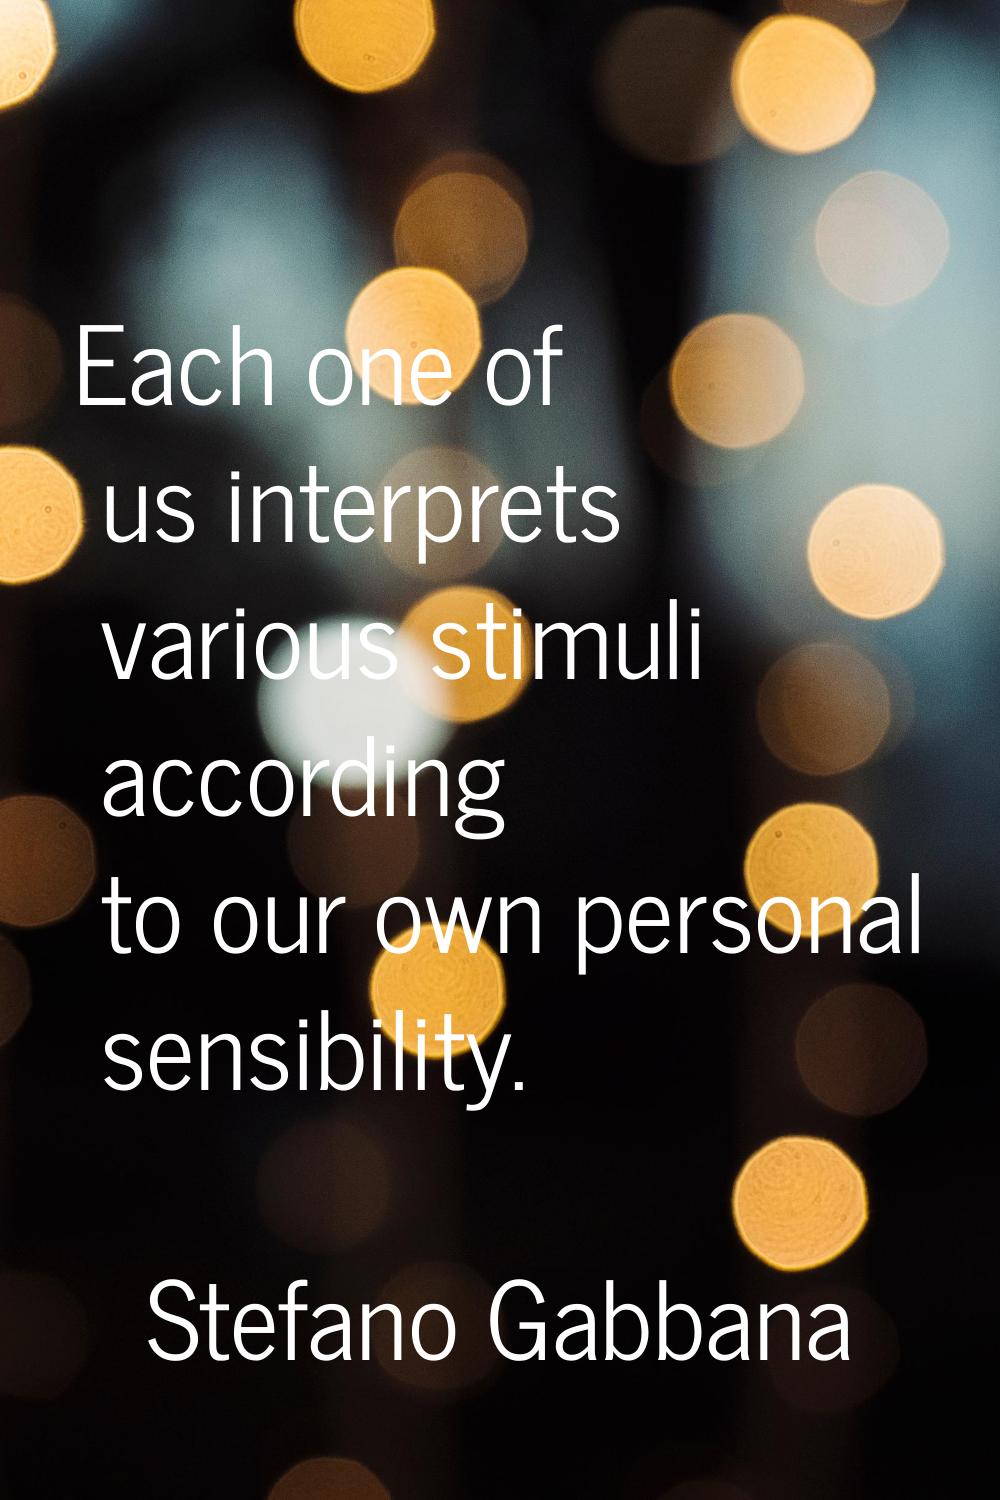 Each one of us interprets various stimuli according to our own personal sensibility.